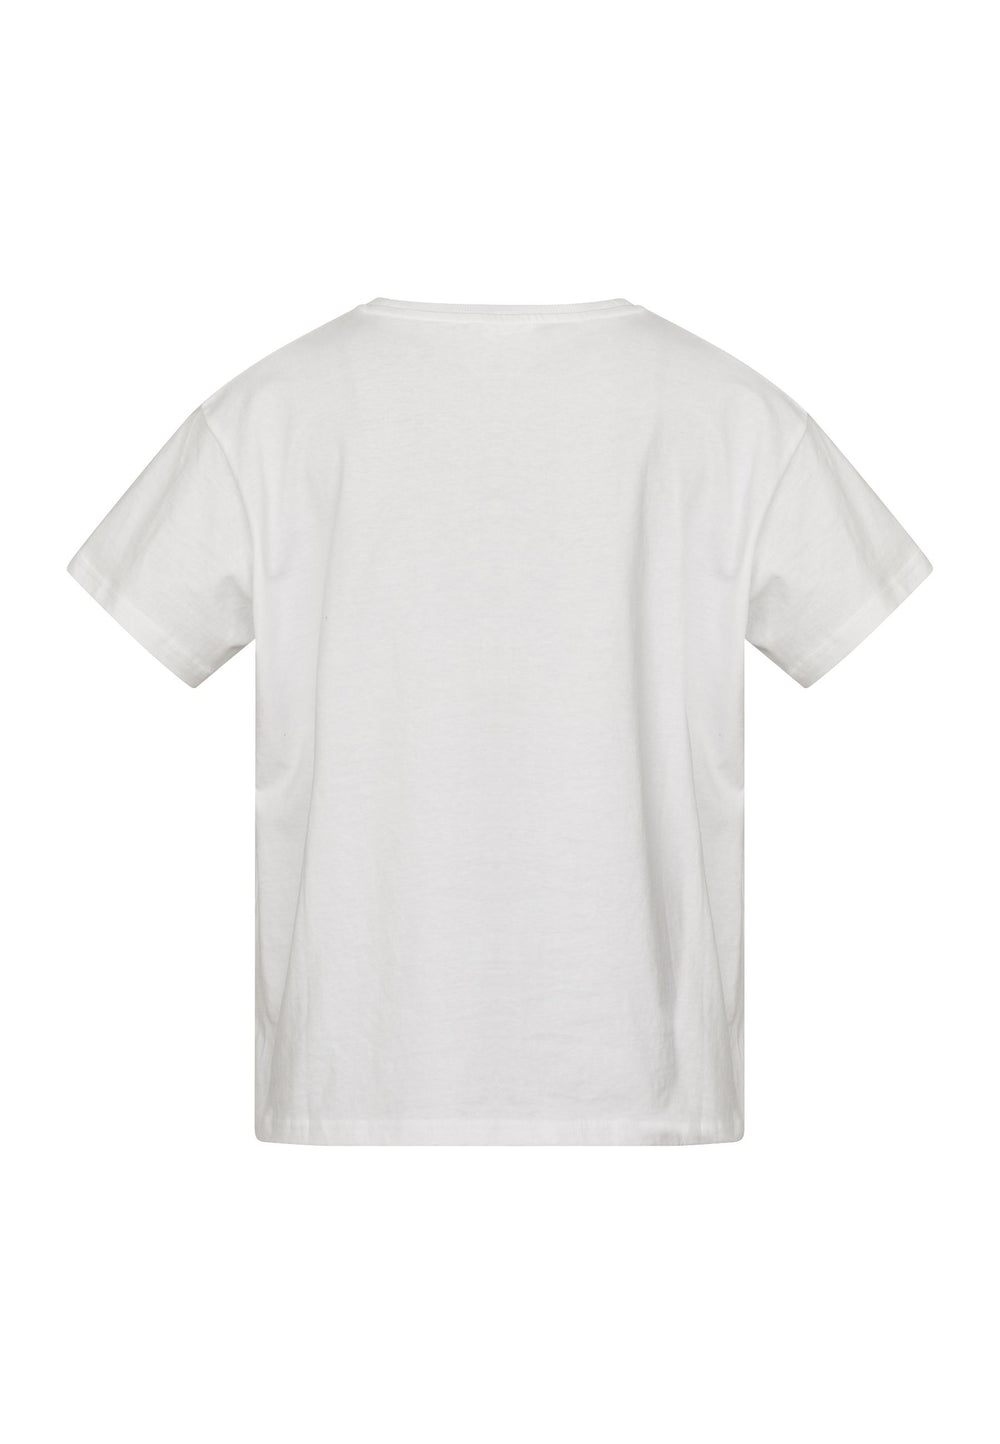 Sisters Point - Pein-Ss12 - 800 White/L. Blue T-shirts 